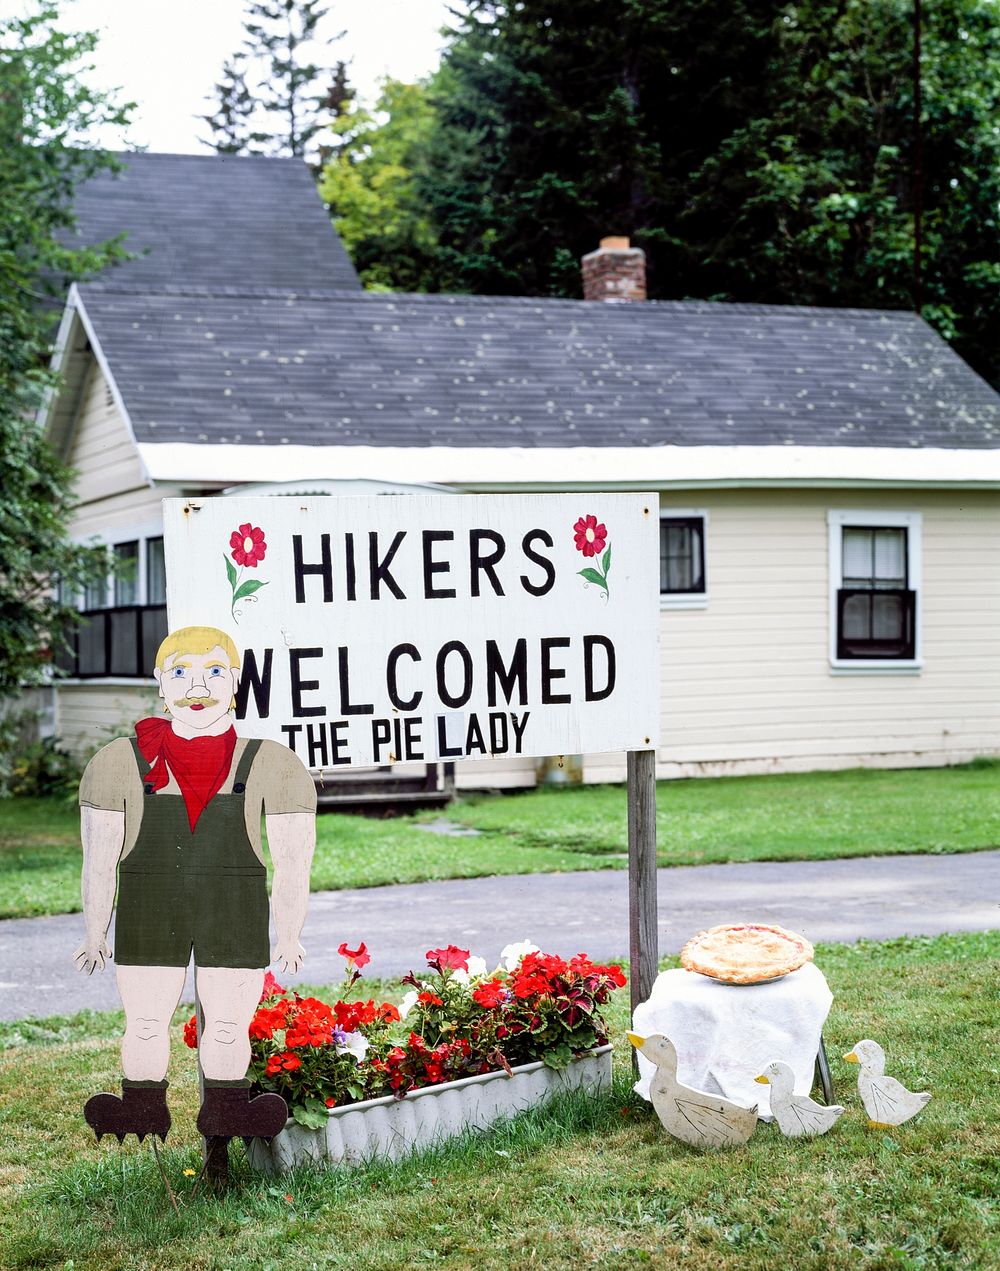 Hikers welcome sign at the pie lady shop in Maine. Original image from Carol M. Highsmith&rsquo;s America, Library of…